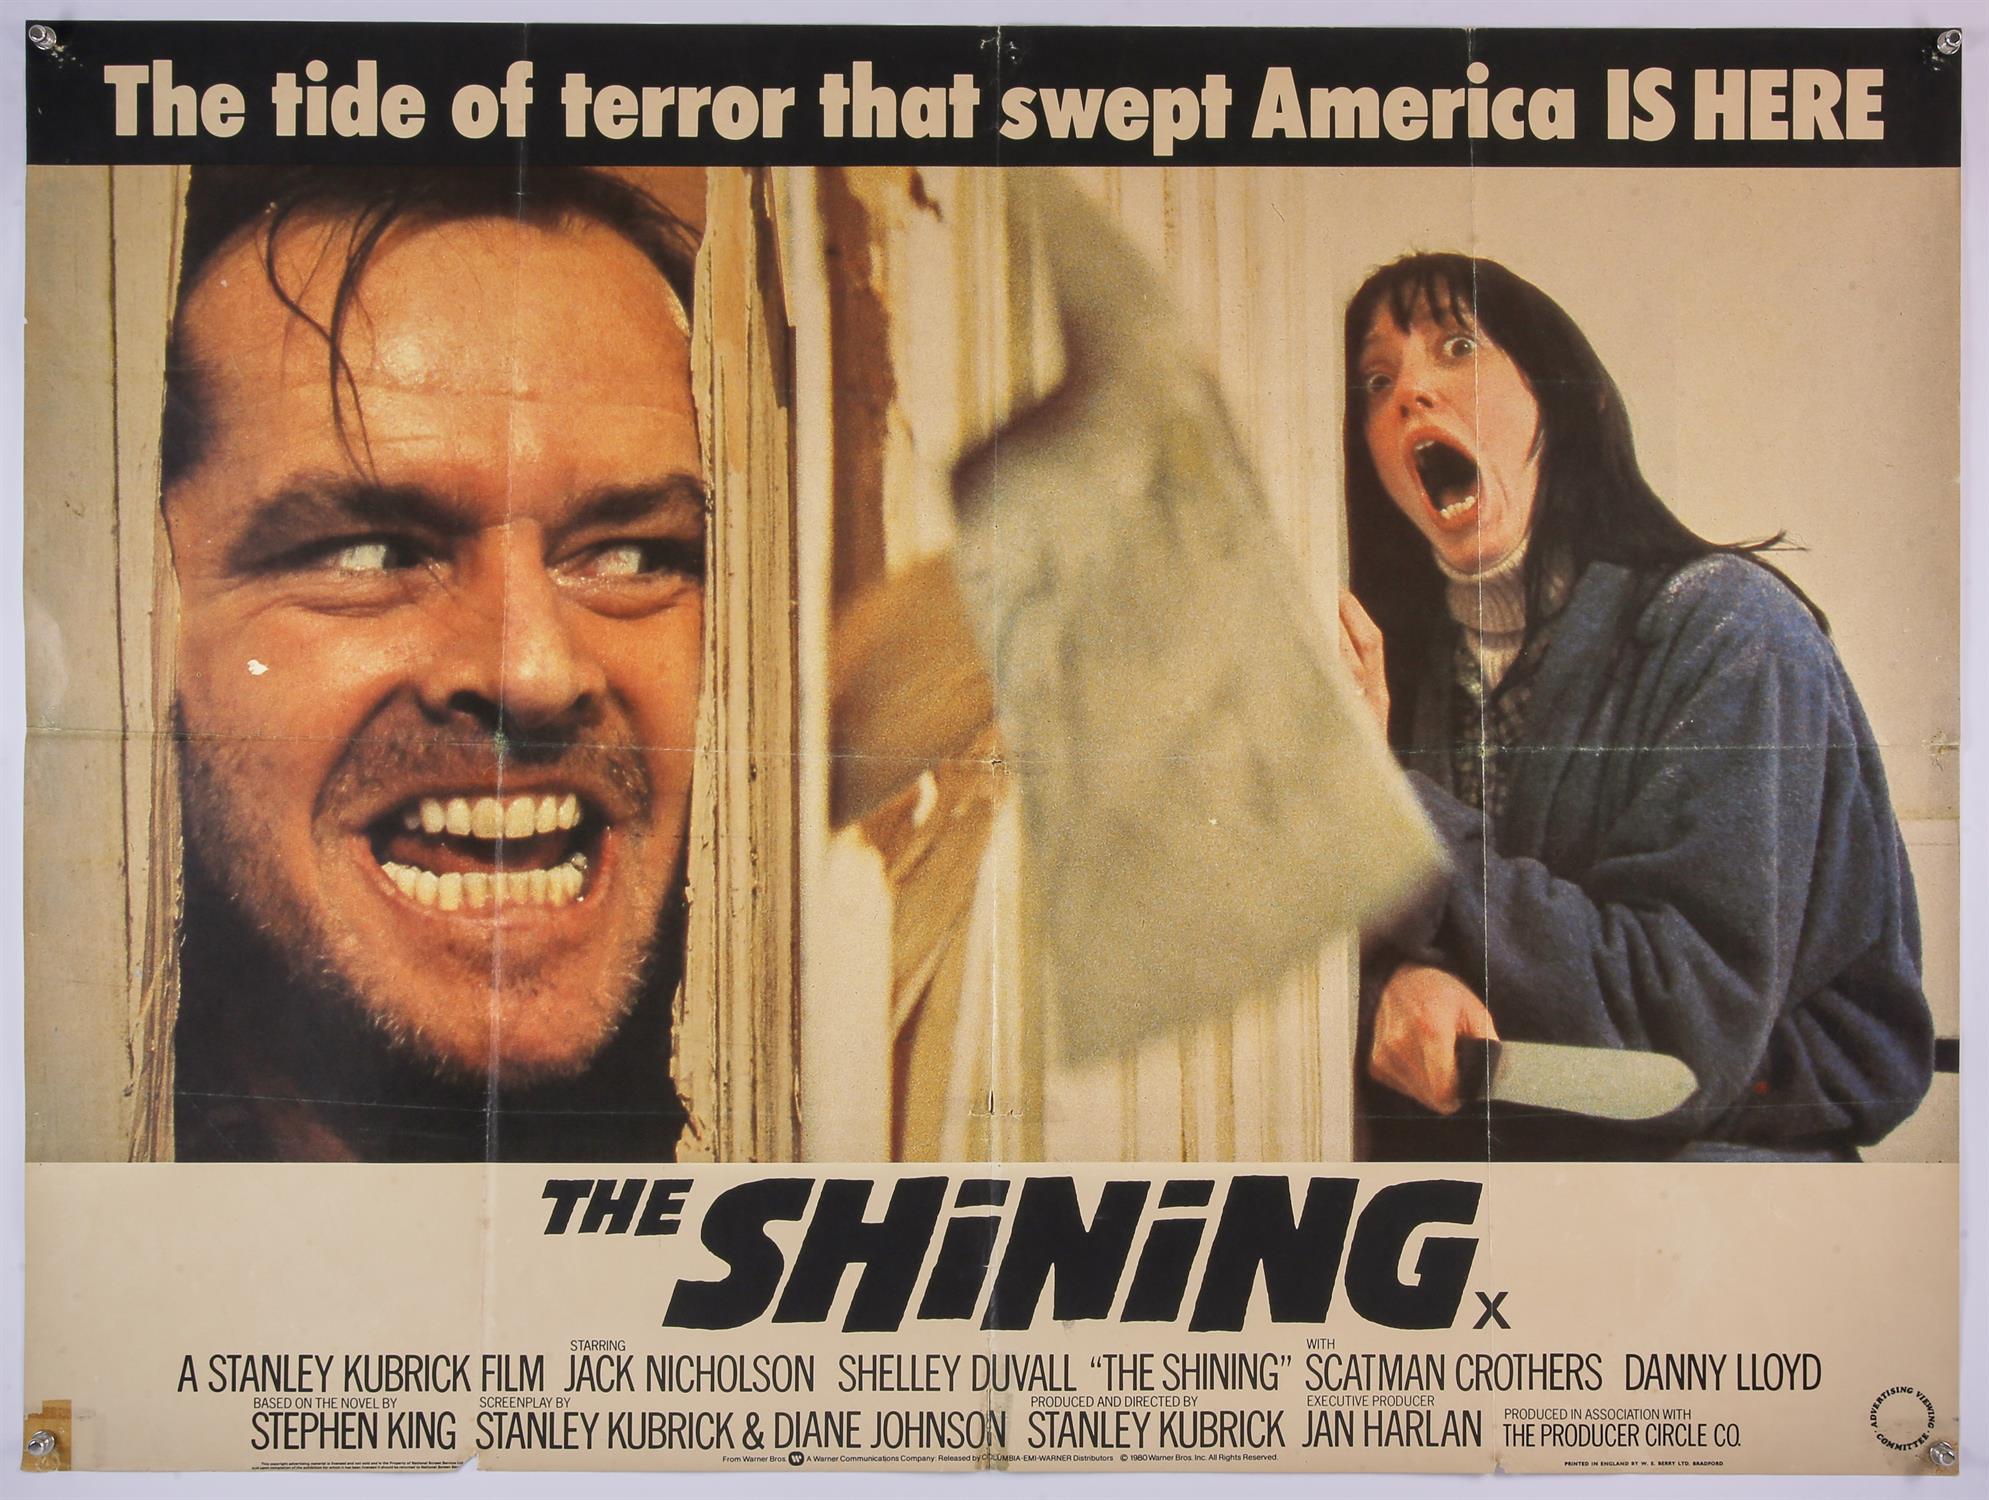 40+ British Quad film posters including The Shining, Halloween II, Outland, Poltergeist, The Fly,